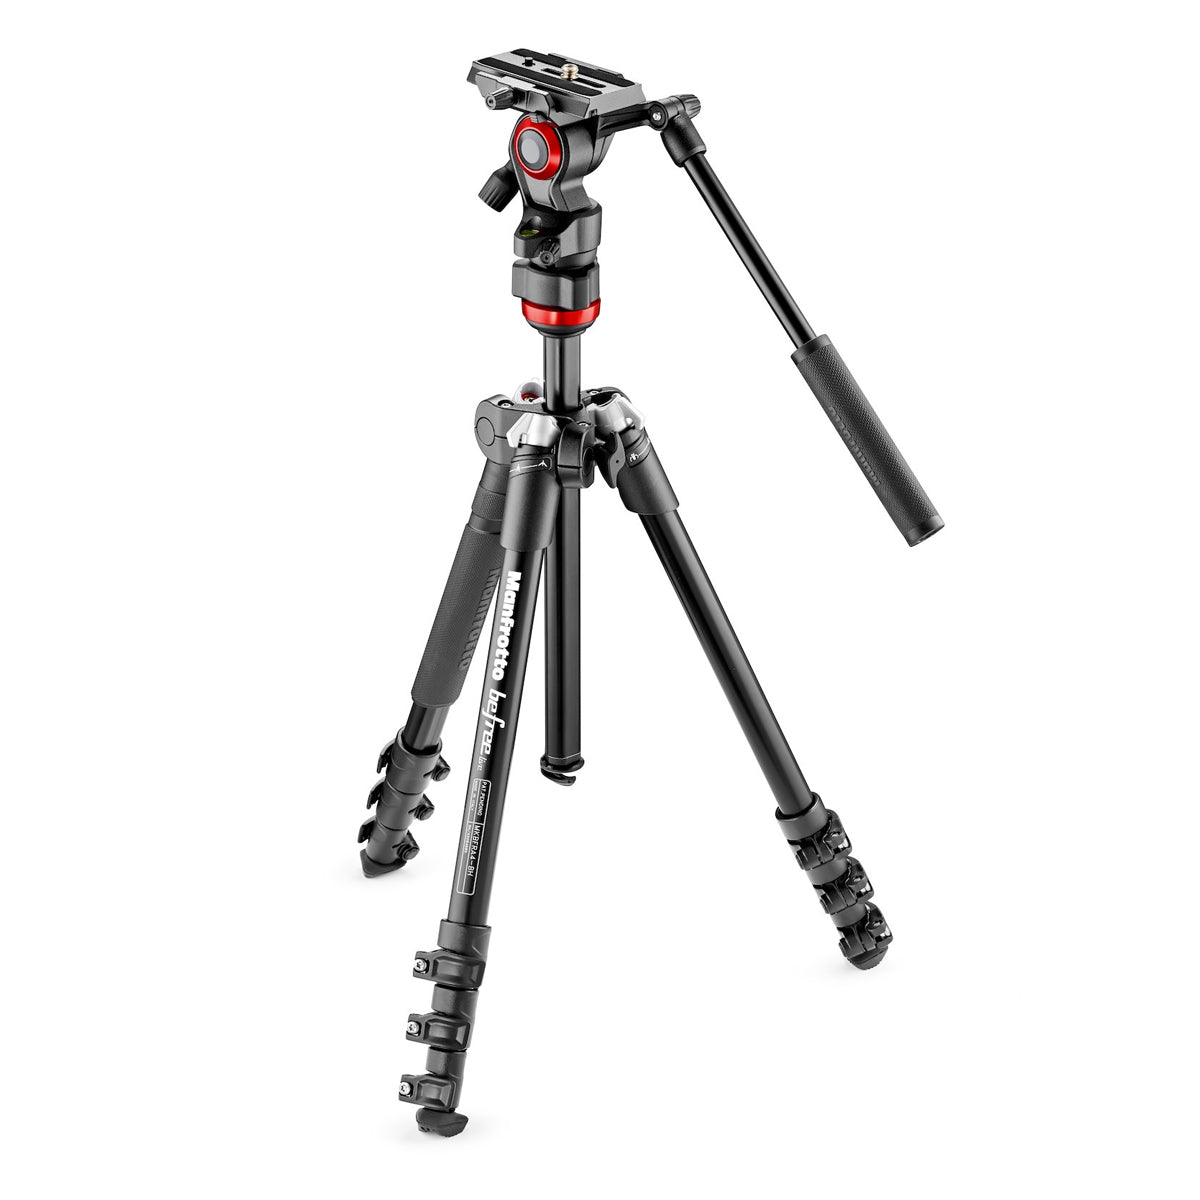 Manfrotto Befree Live Fluid Video Head with Befree Aluminum Tripod Kit in Manfrotto Befree Live Fluid Video Head with Befree Aluminum Tripod Kit by Manfrotto | Optics - goHUNT Shop by GOHUNT | Manfrotto - GOHUNT Shop